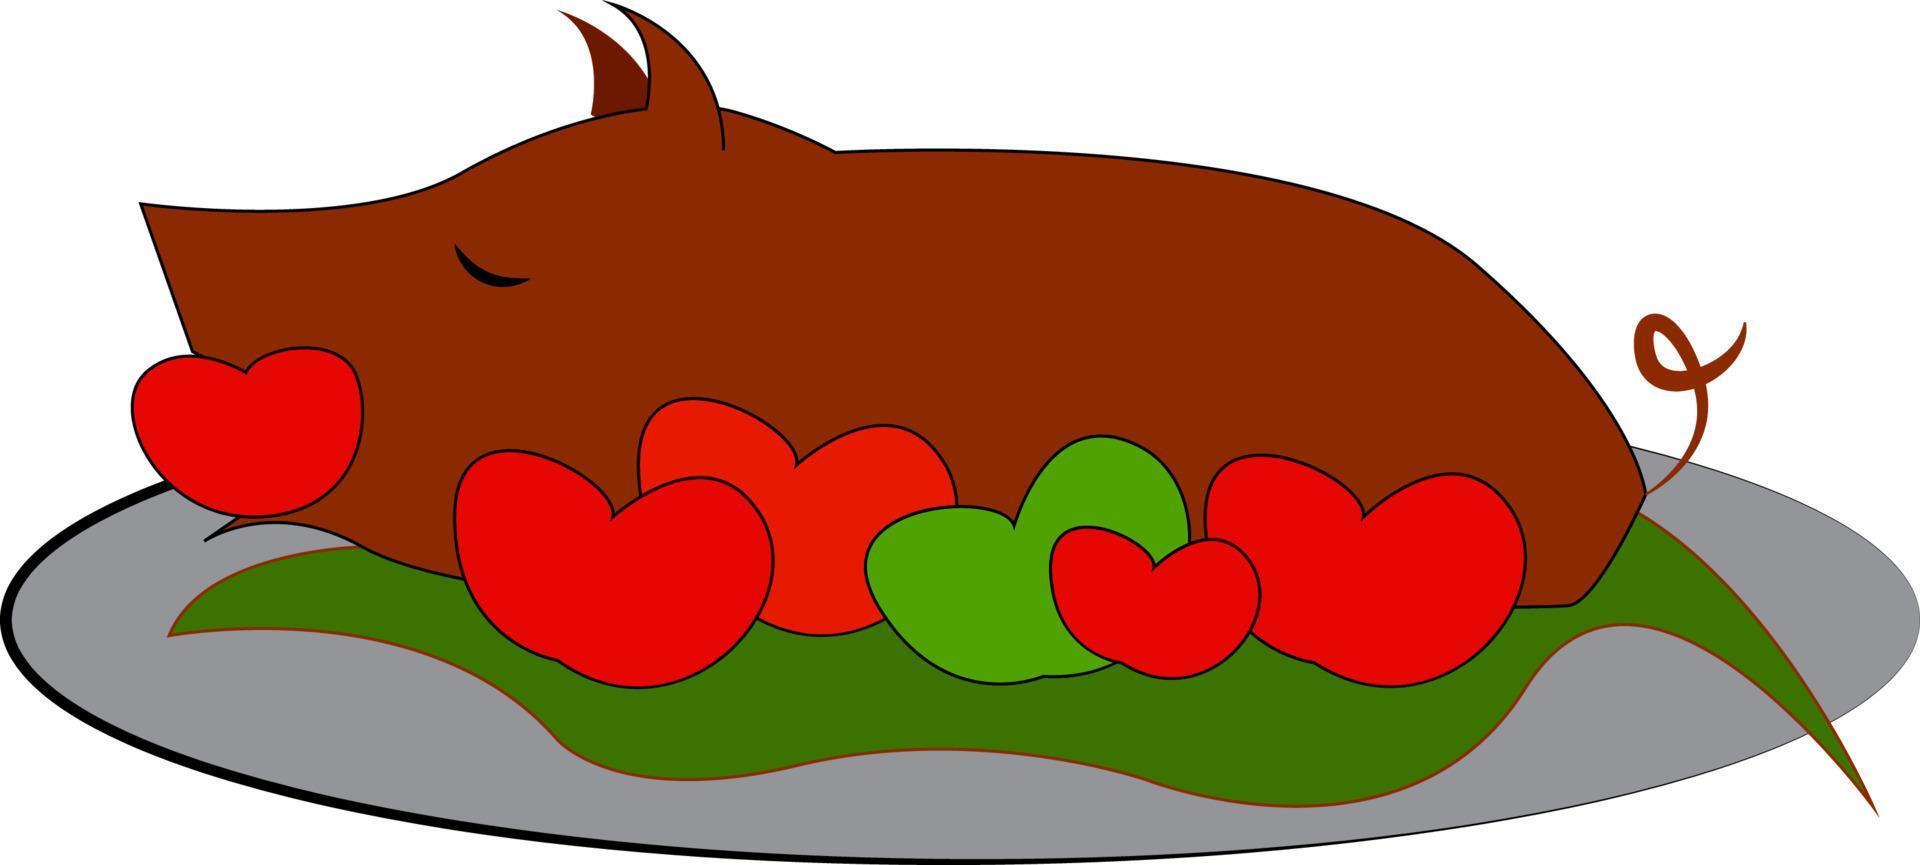 A roasted pig, vector or color illustration.